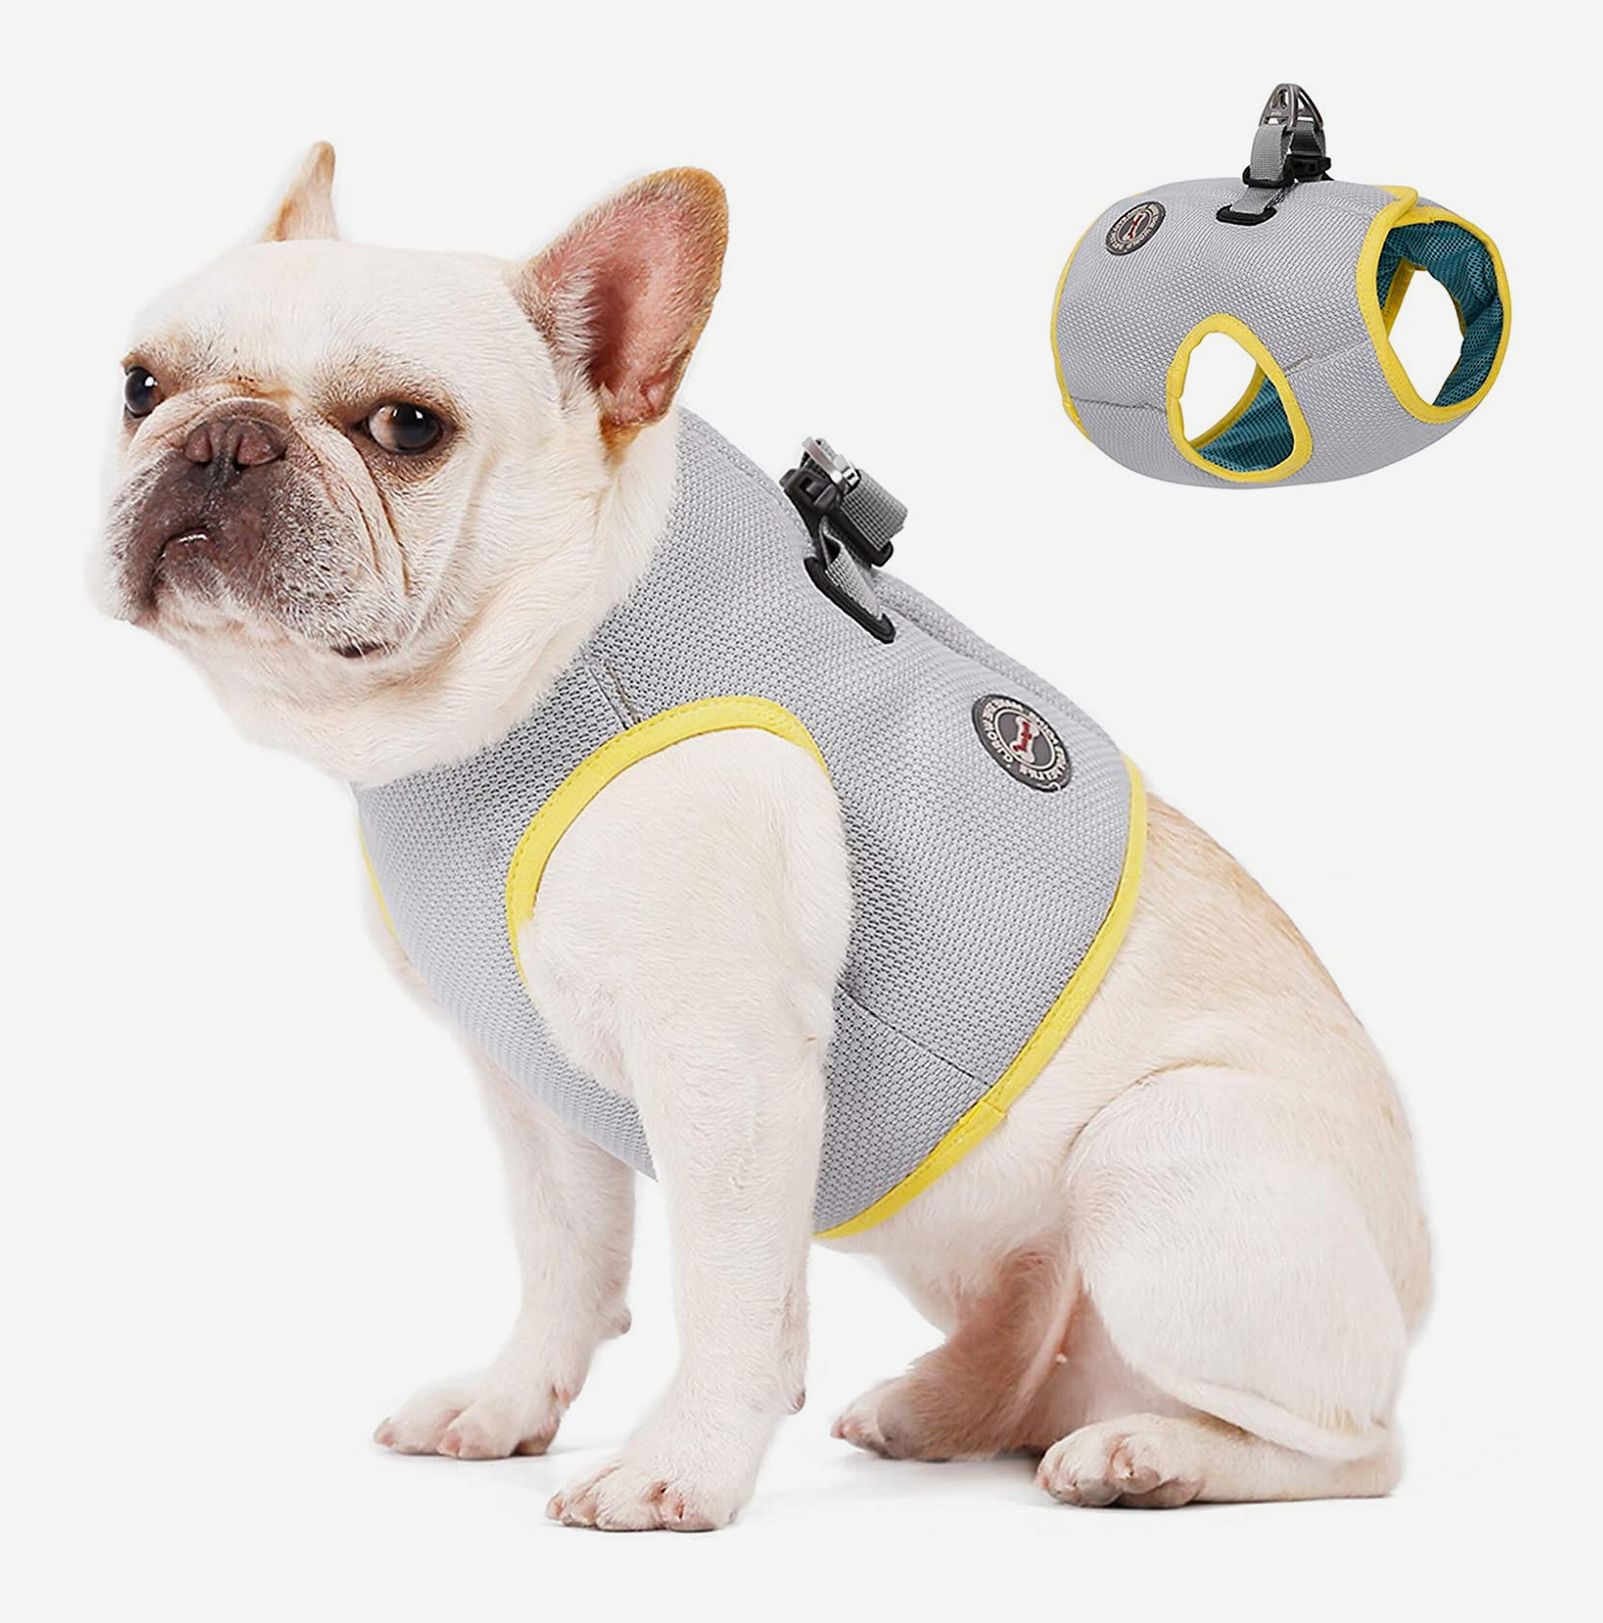 Whats The Best Harness For A French Bulldog